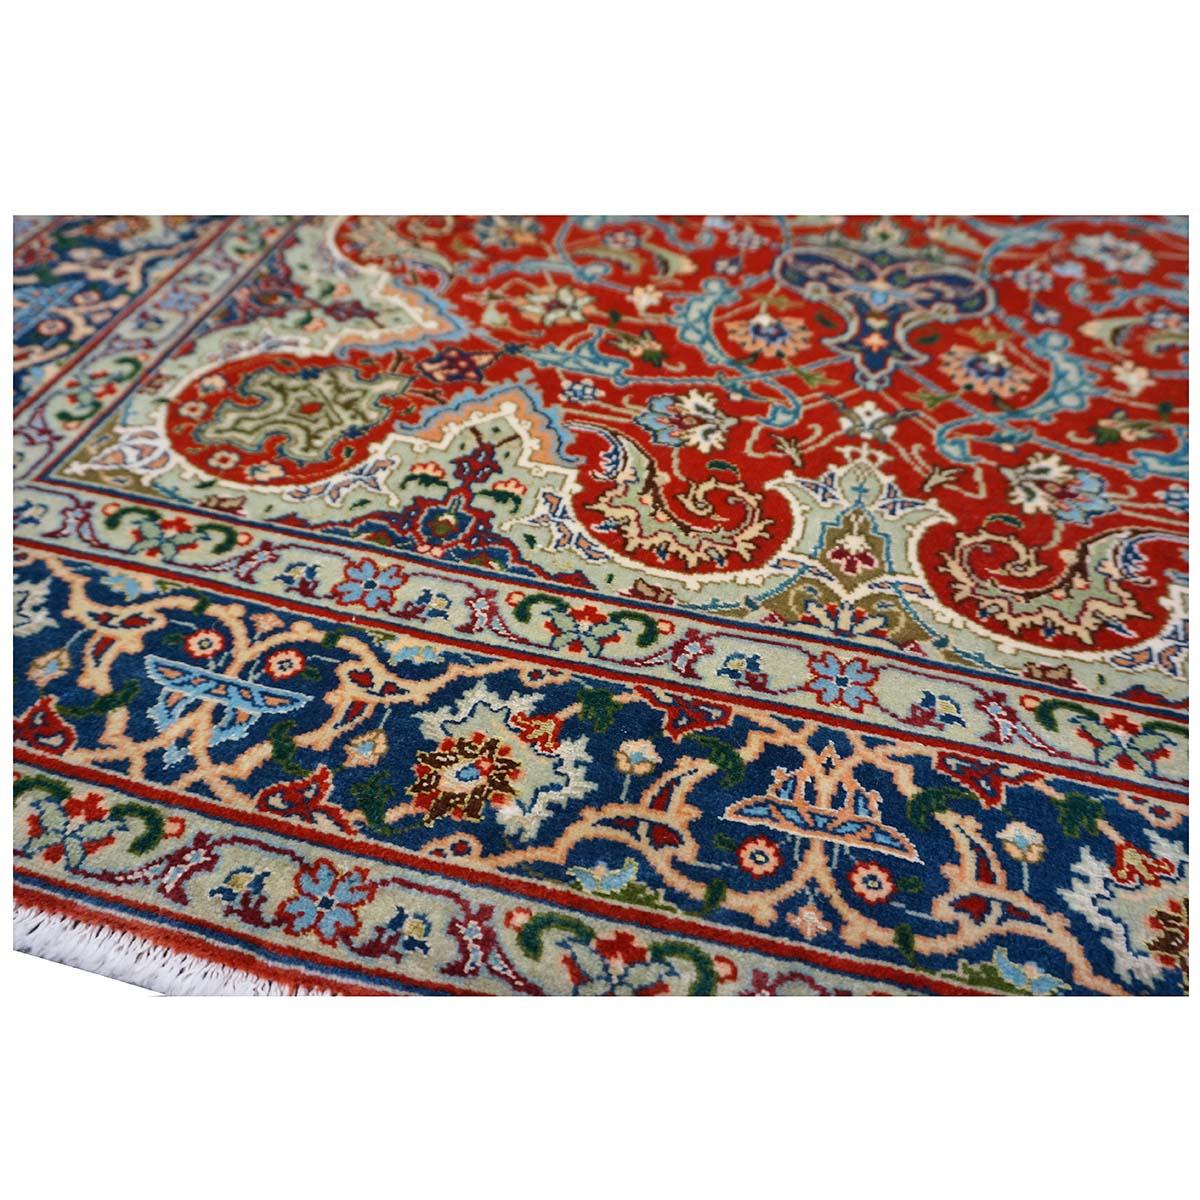 Antique 1940s Fine Persian Tabriz 3x4 Red, Navy, & Blue Handmade Area Rug For Sale 2